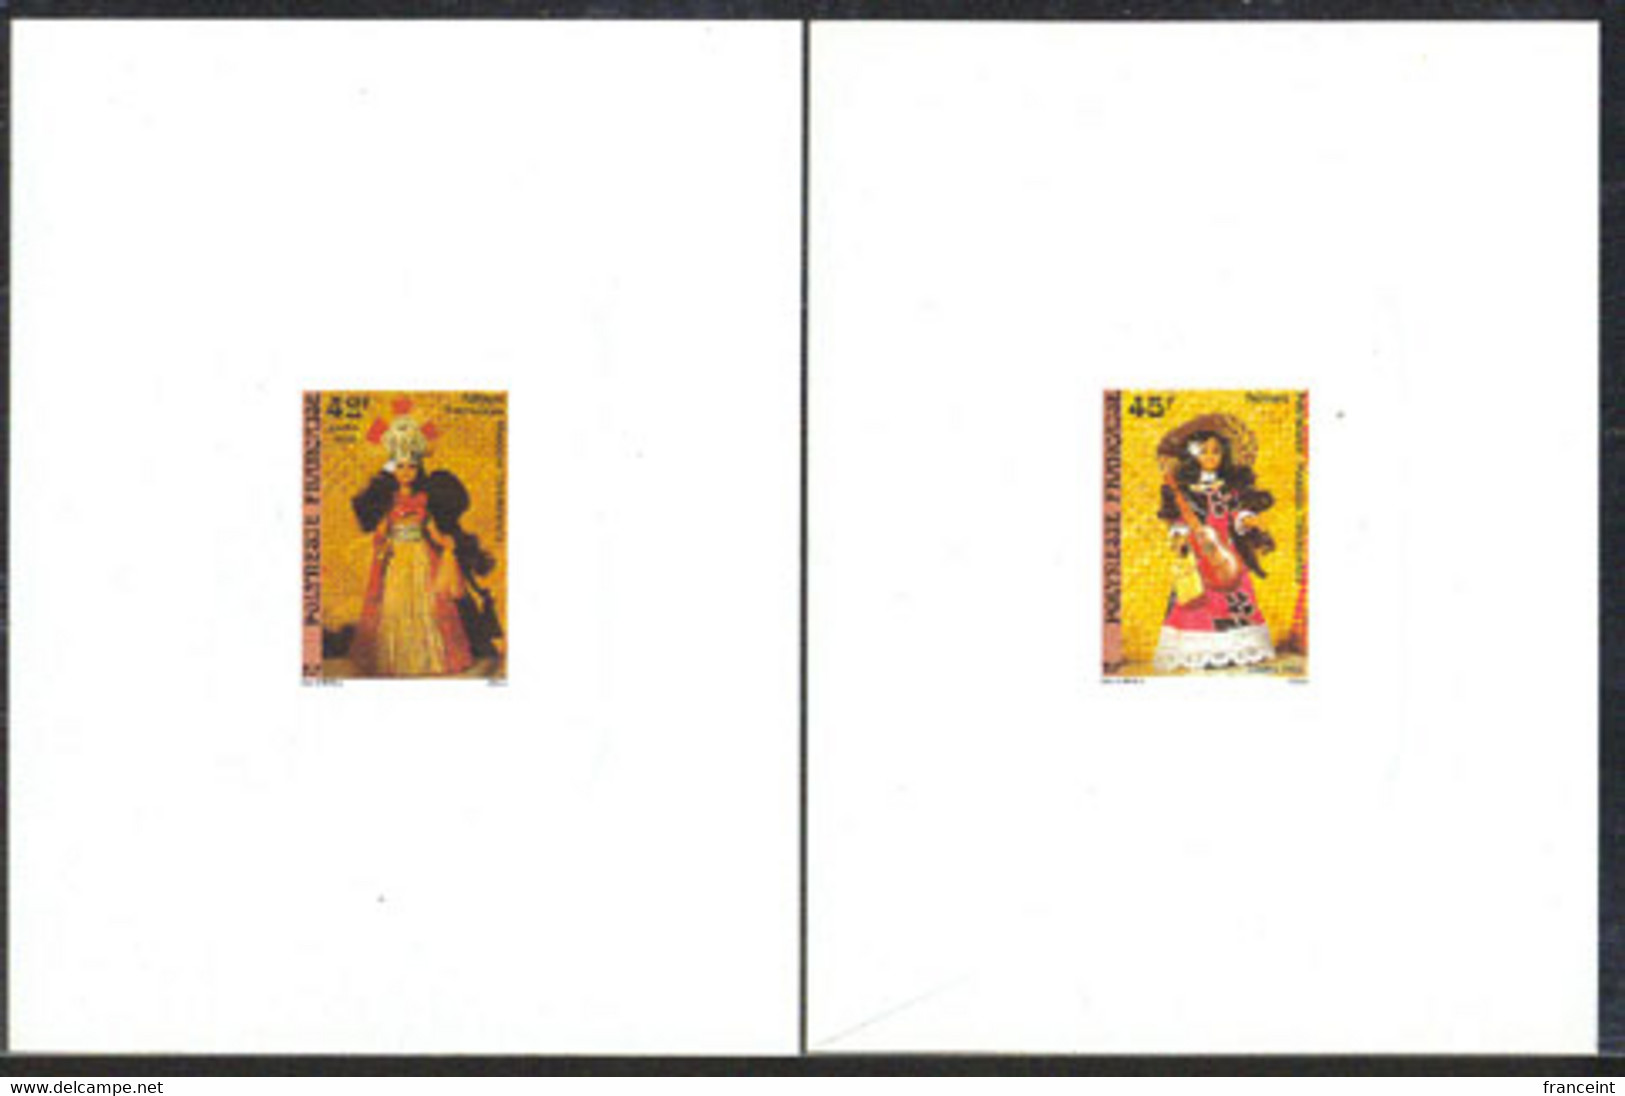 FRENCH POLYNESIA (1988) Tahitian Dolls. Set Of 3 Deluxe Sheets. Scott Nos 486-8, Yvert Nos 307-9. - Imperforates, Proofs & Errors